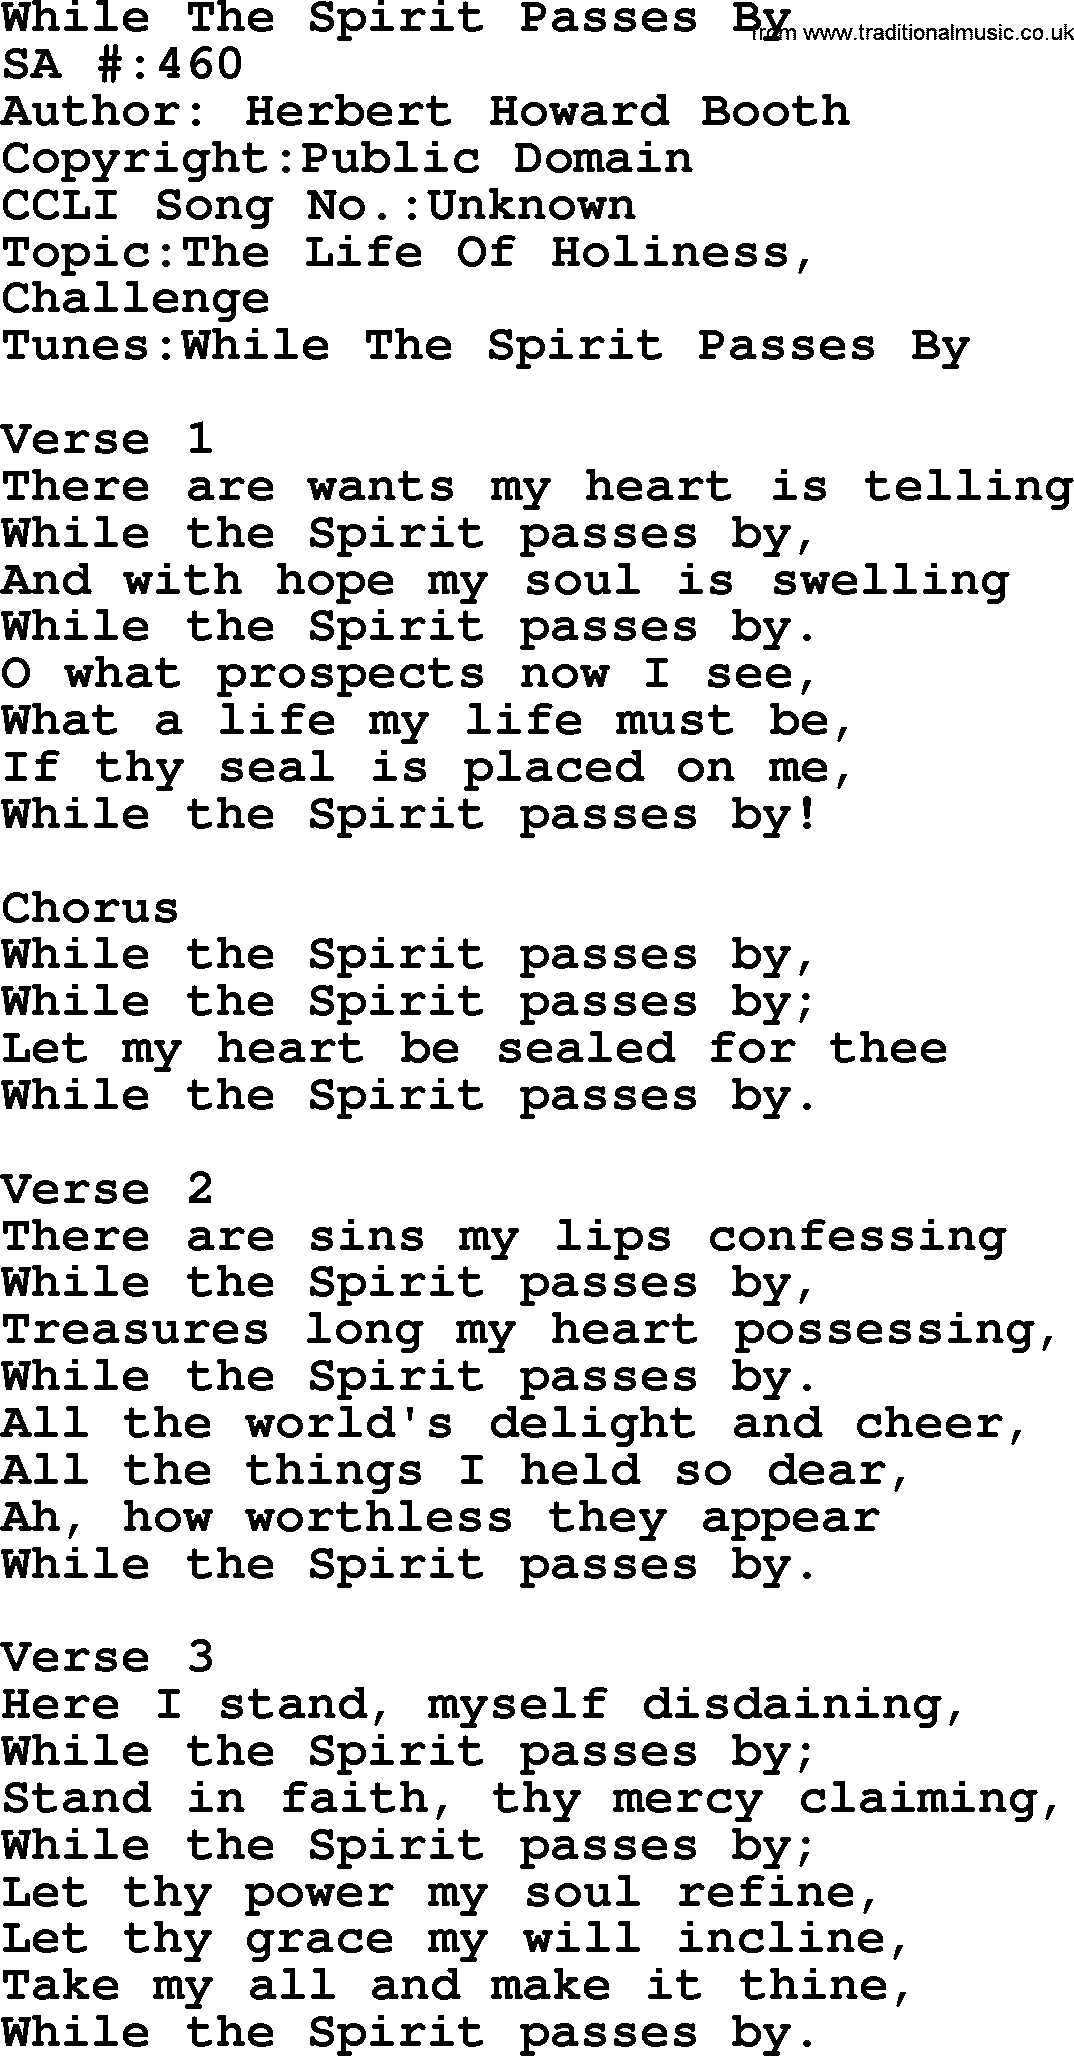 Salvation Army Hymnal, title: While The Spirit Passes By, with lyrics and PDF,